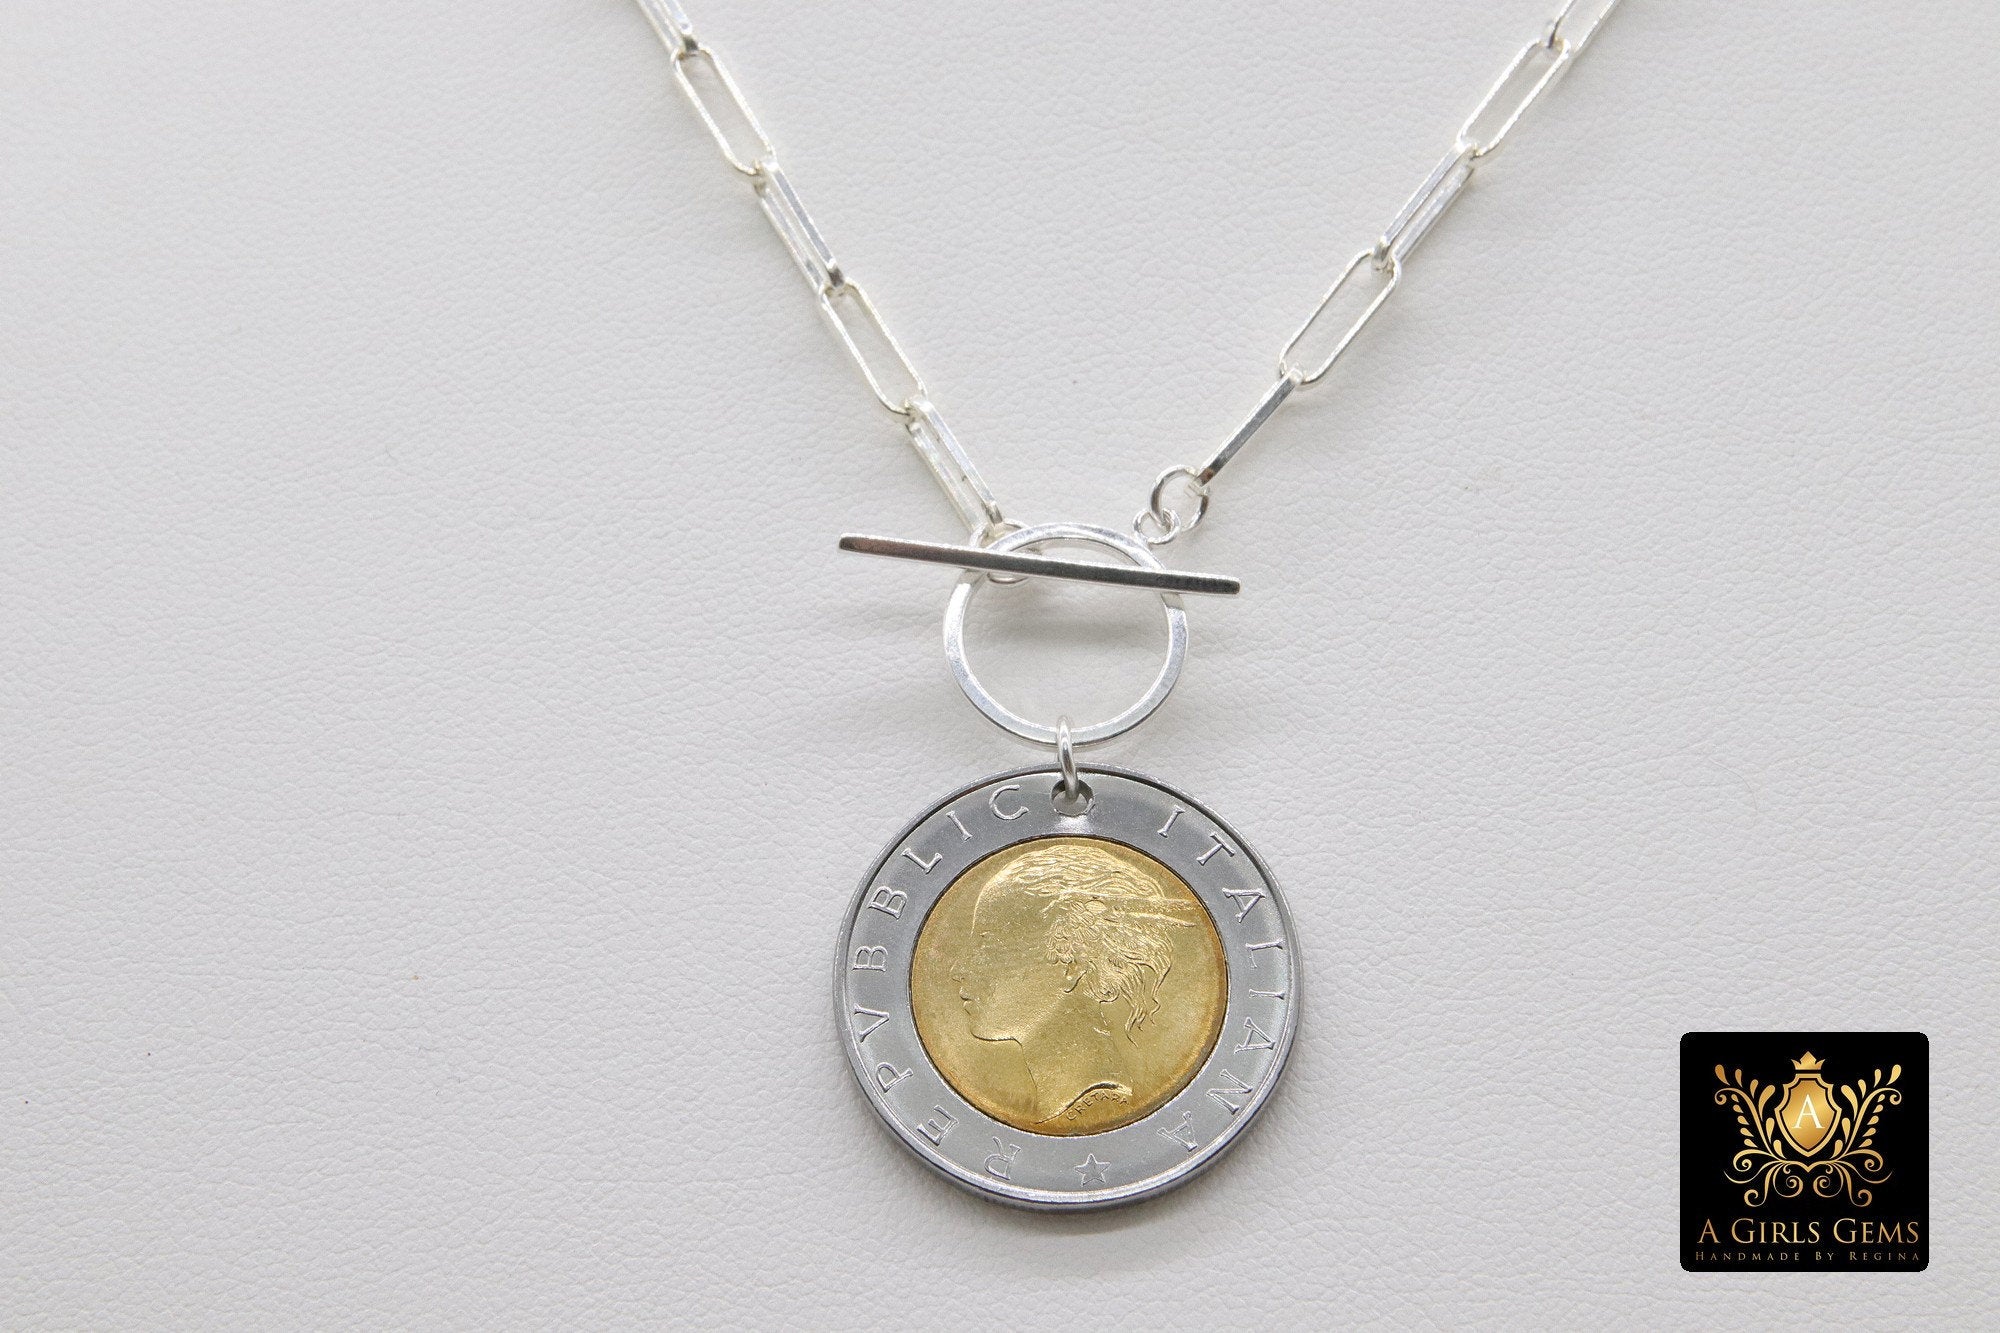 Silver Coin Necklace, 925 Sterling Silver 11 mm Chain, Toggle Wrap Necklace - A Girls Gems